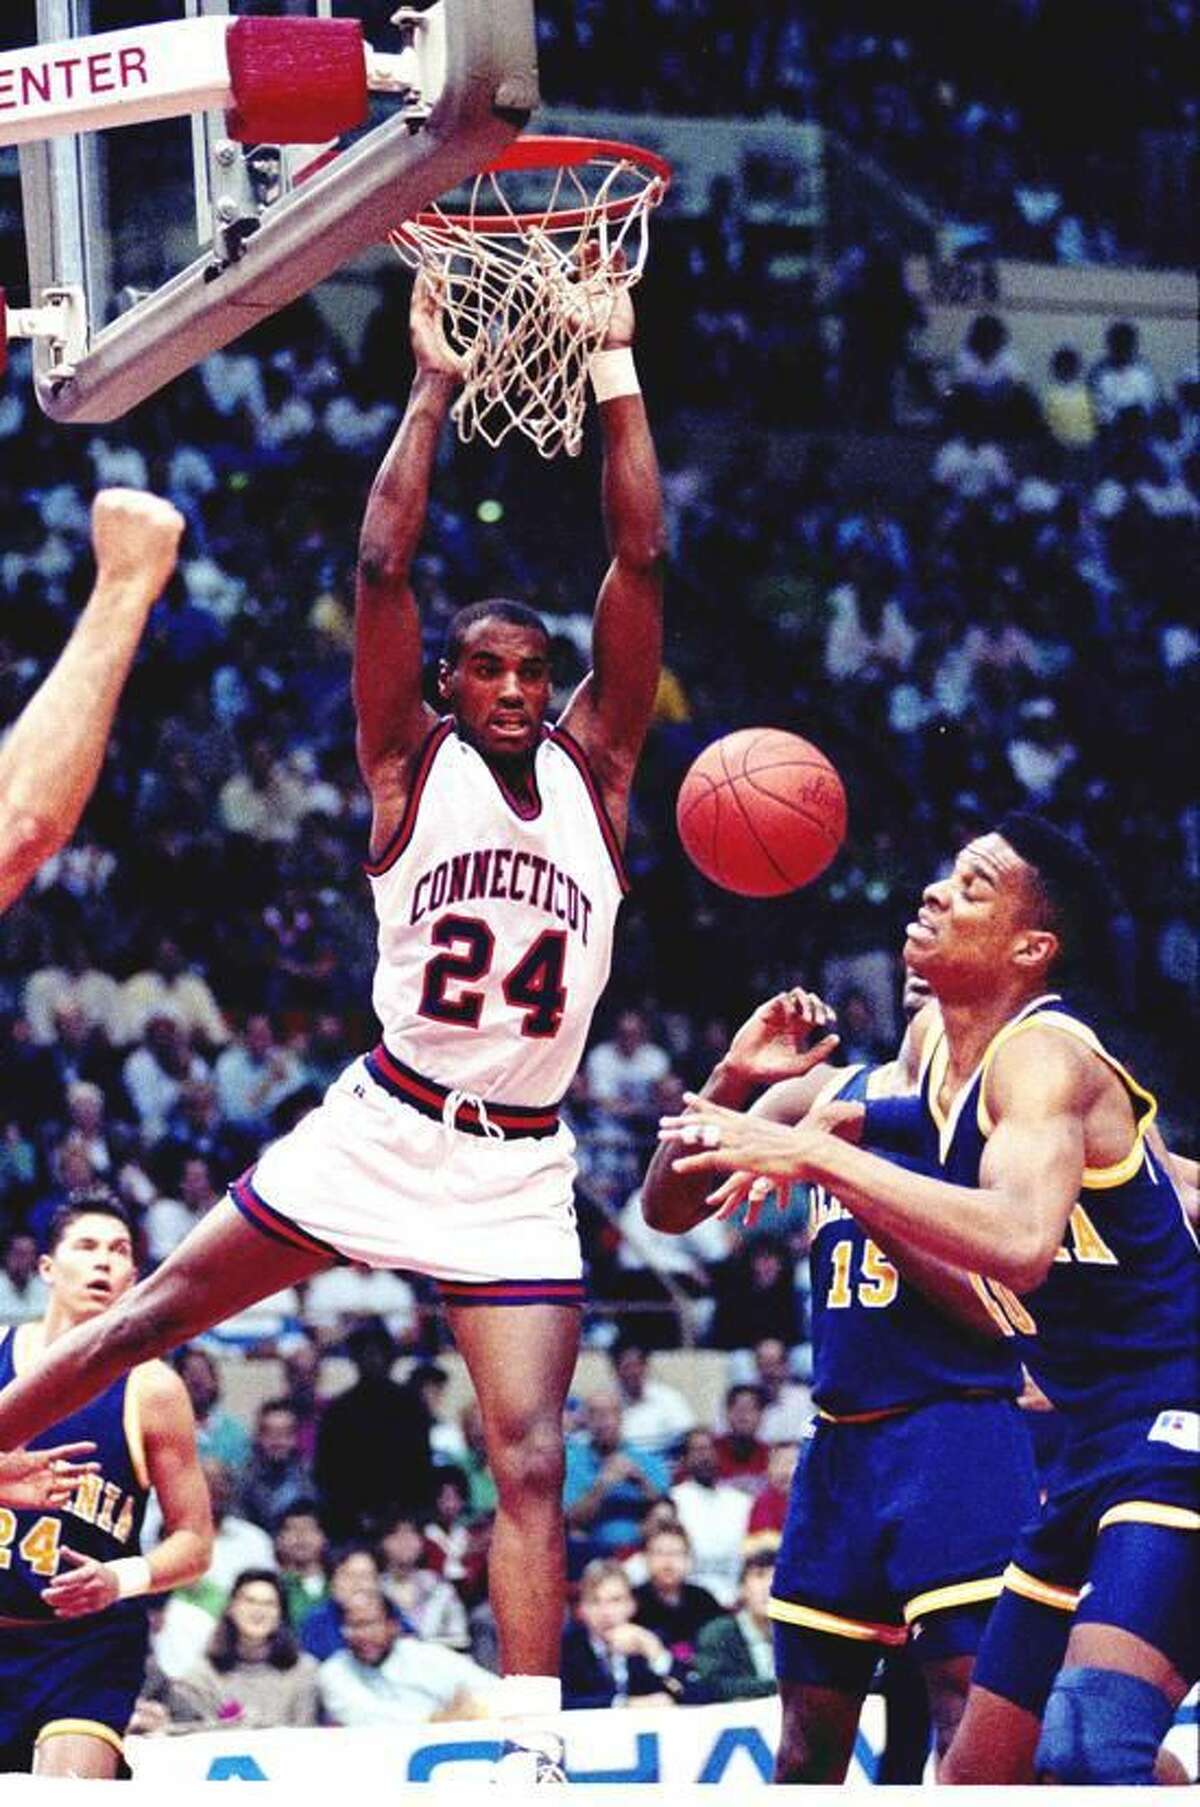 UConn's Scott Burrell of Hamden dunks the ball past Byrant Walton, right, and Brian Hendrick (15) of the University of California in the UConn-California game in the second round of the NCAA East Regional playoffs in Hartford, Conn., Saturday, March 17, 1990. (AP Photo/Bob Child)